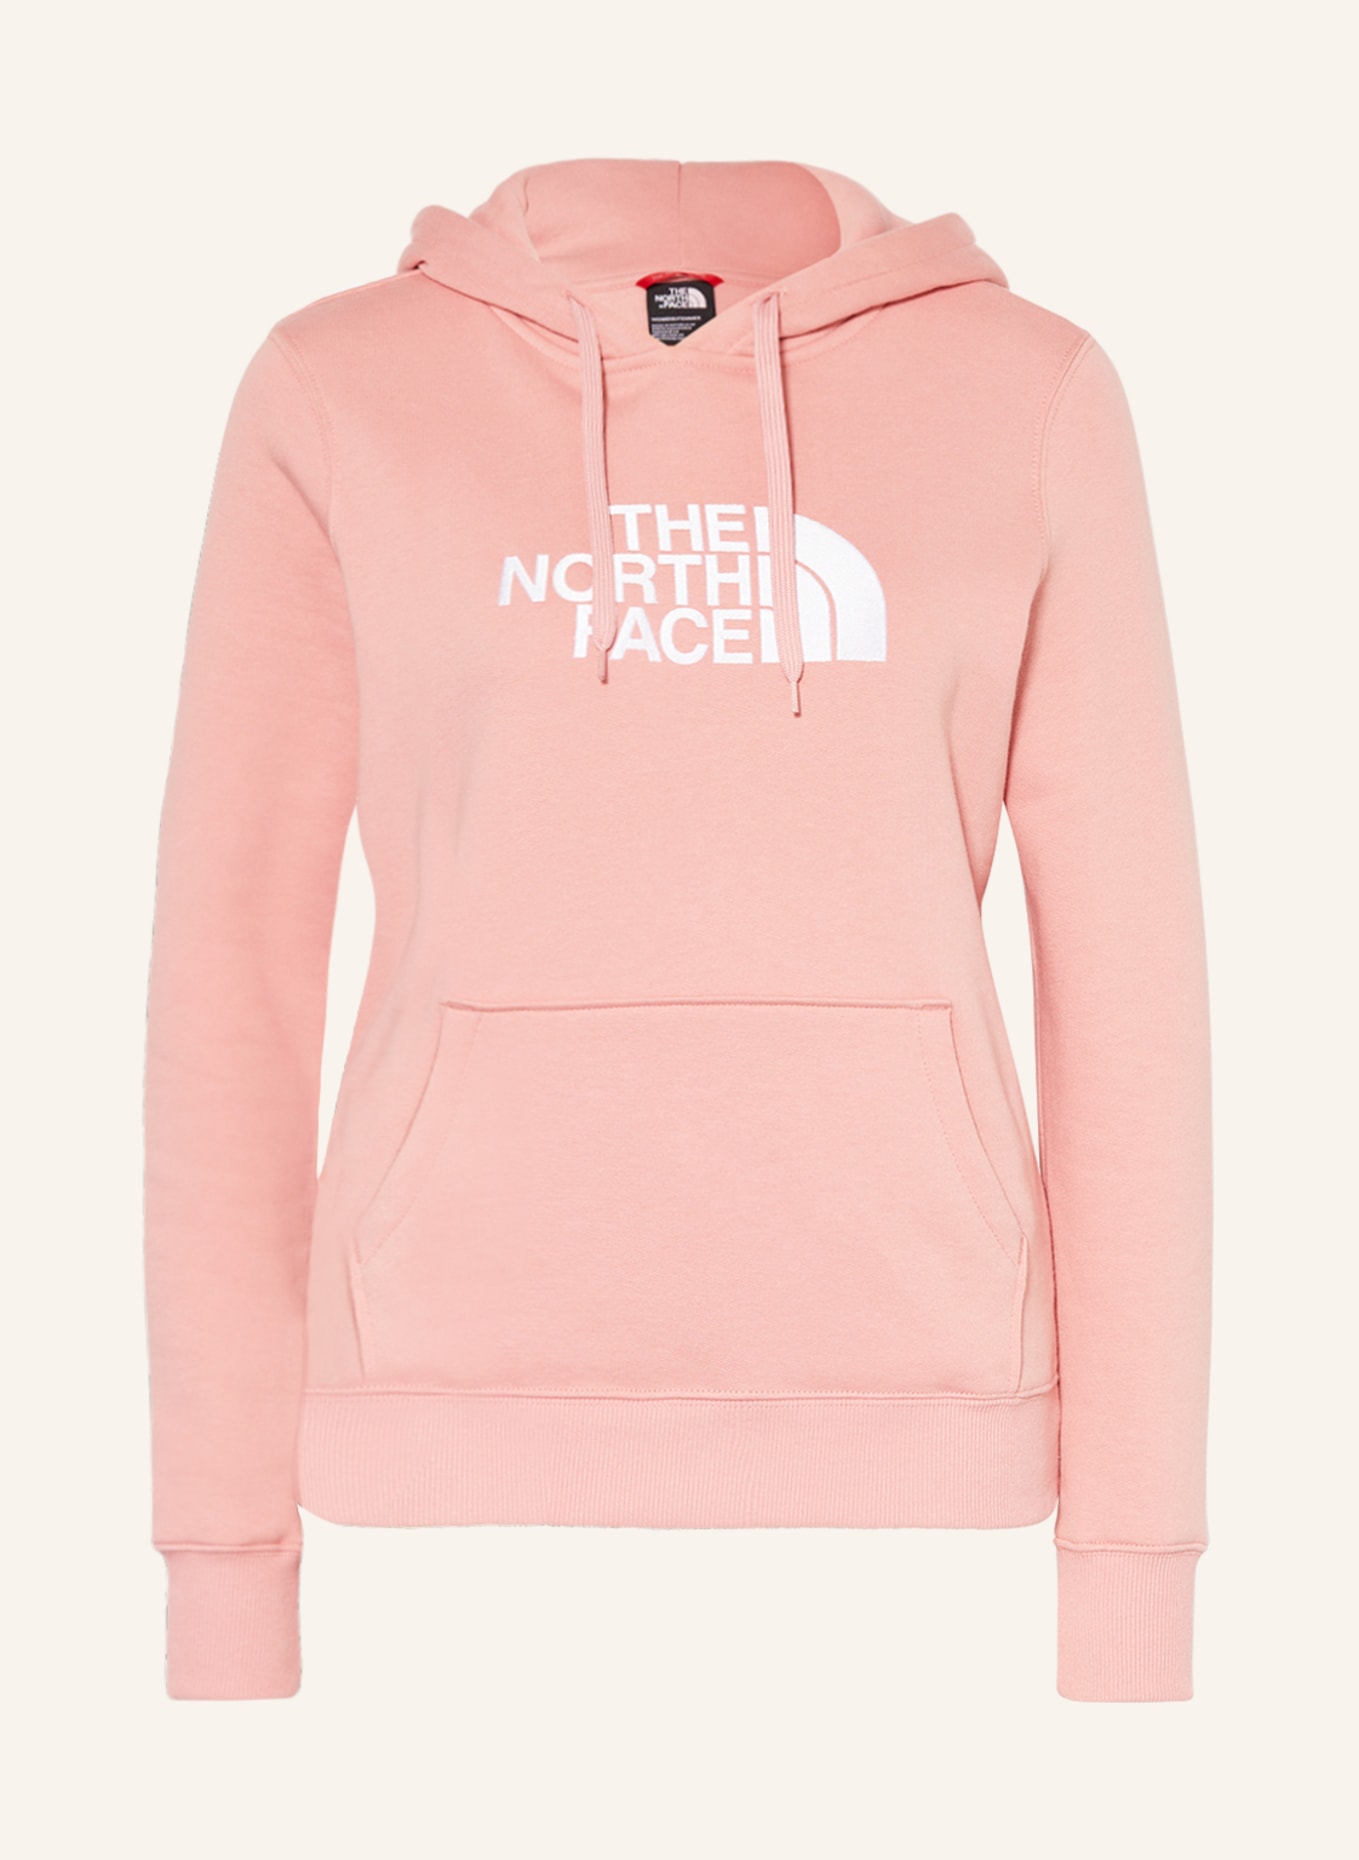 THE NORTH FACE Hoodie DREW, Farbe: ROSÉ/ WEISS (Bild 1)